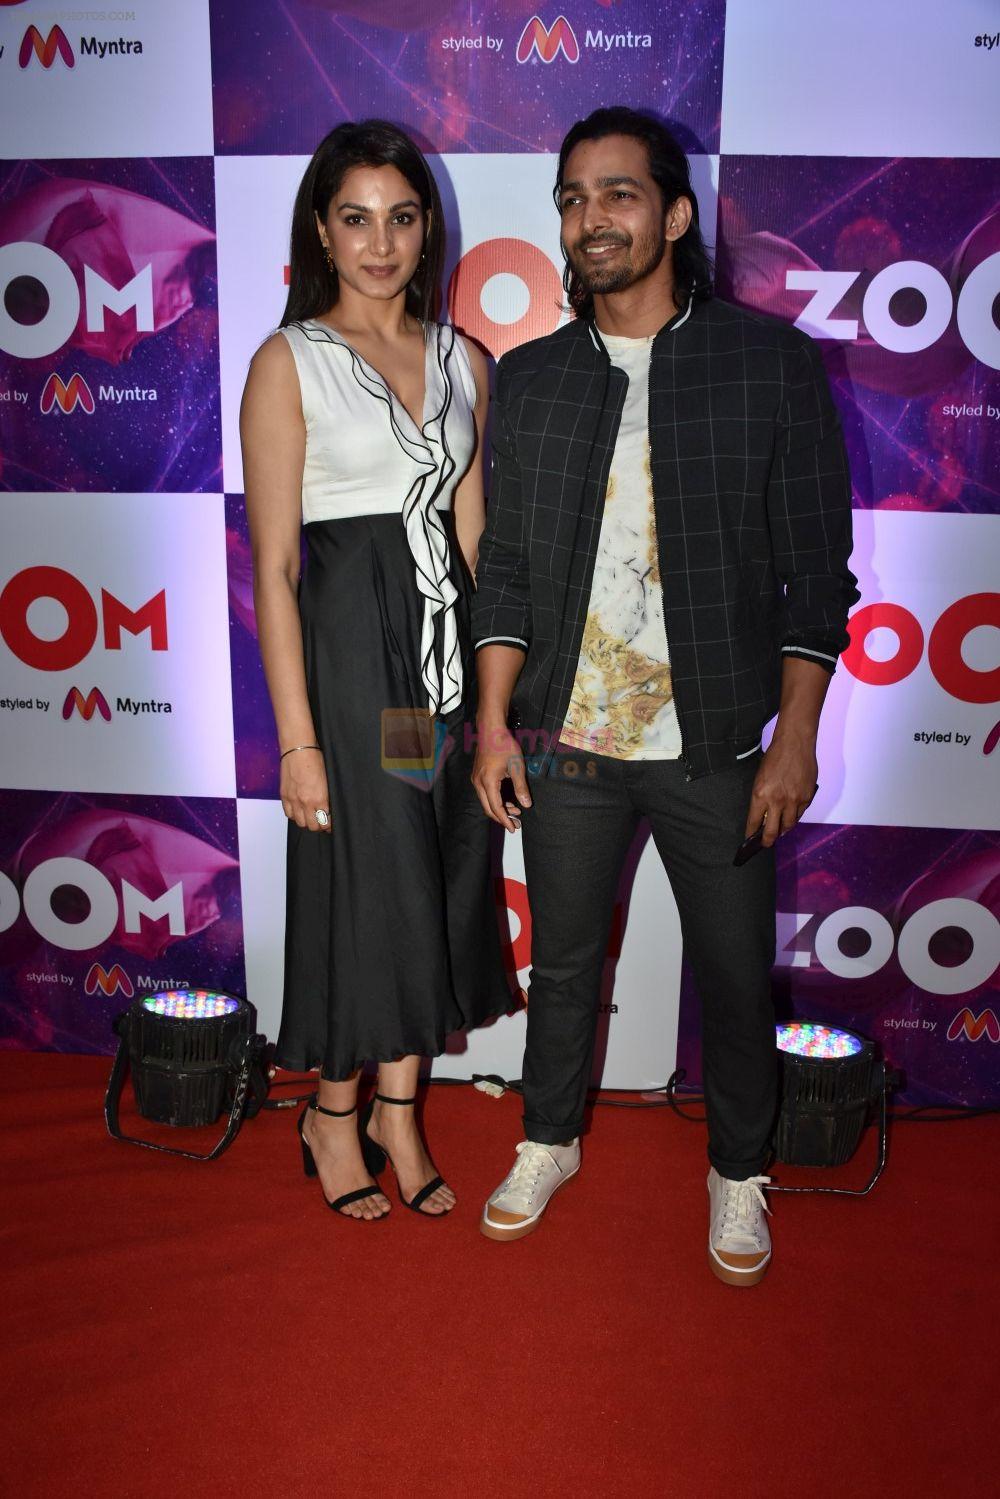 Harshvardhan Rane at the Re-Launch Of Zoom Styles By Myntra Party on 19th April 2018